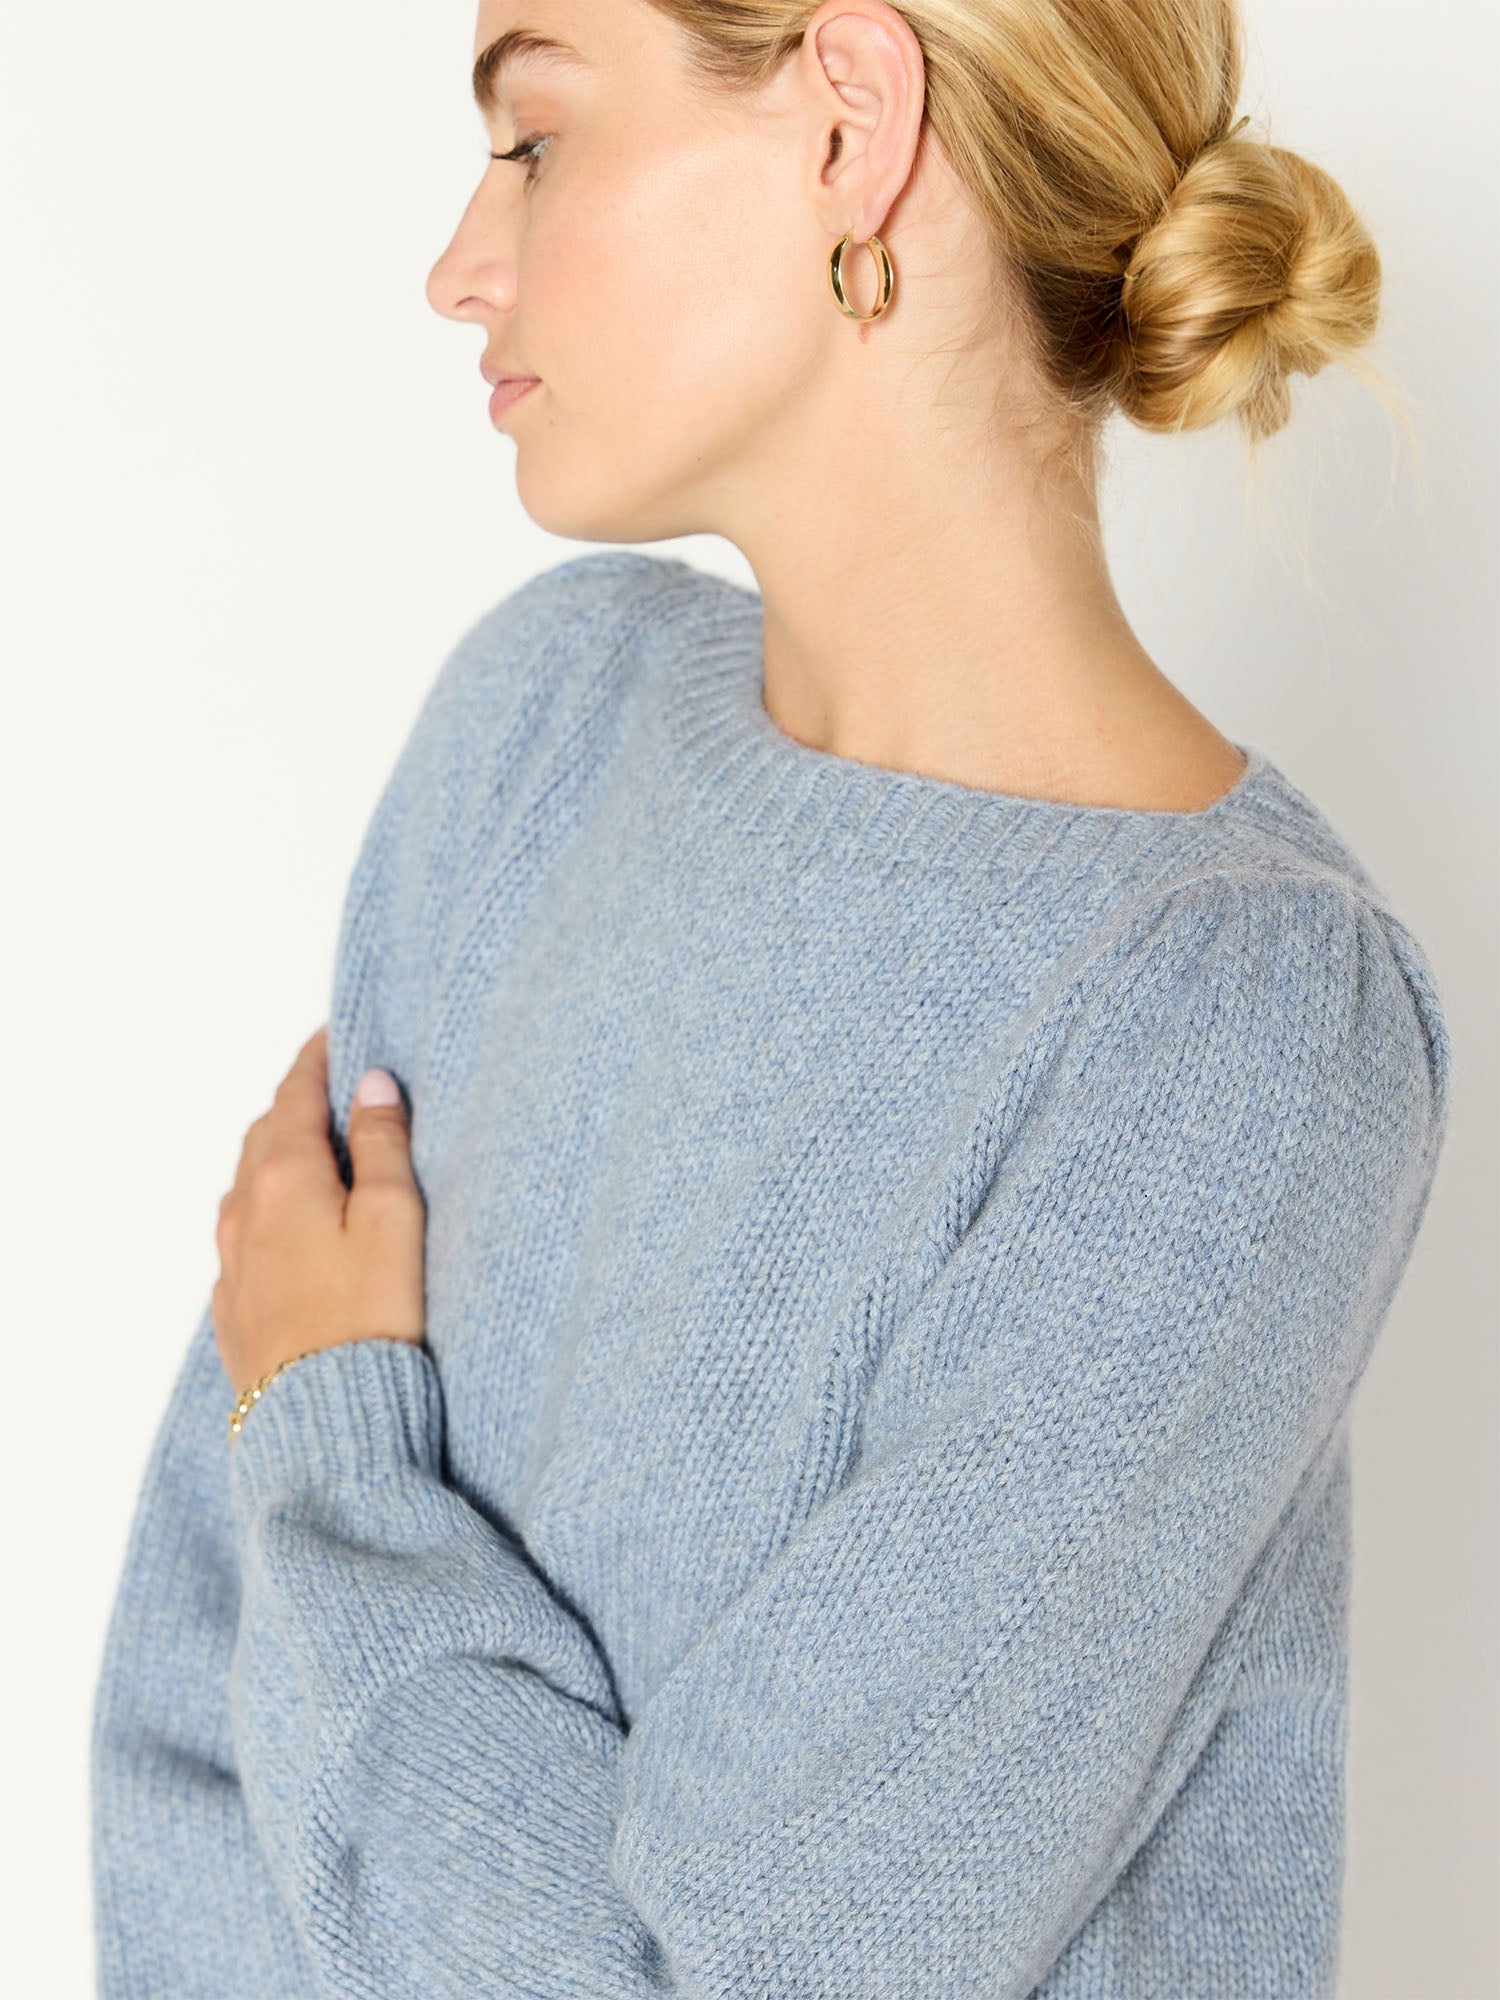 Delphi cashmere boatneck blue sweater top view